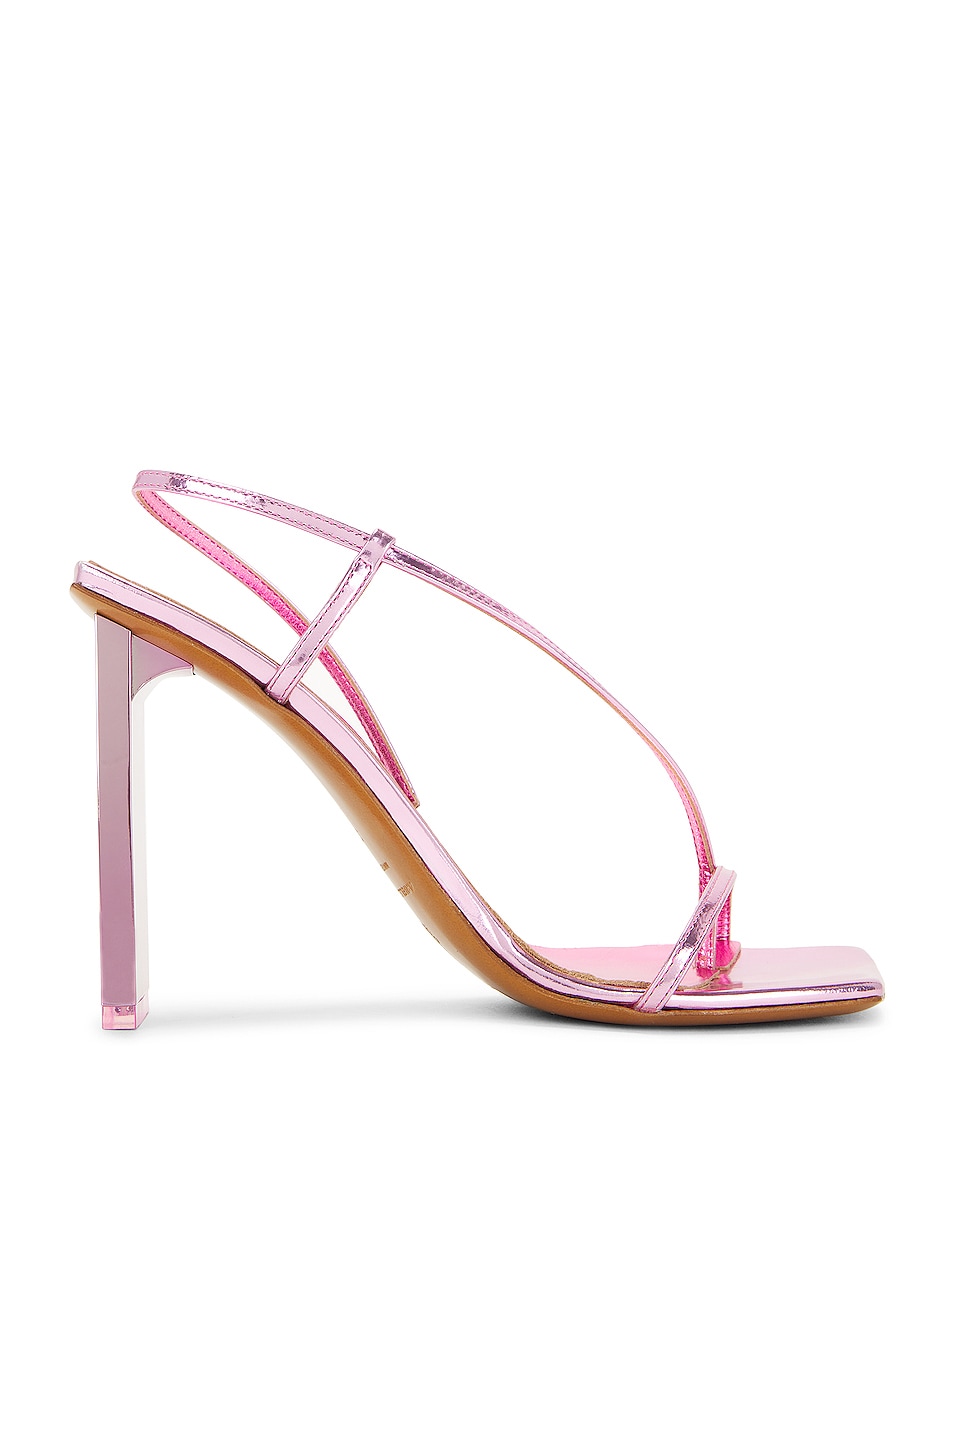 Image 1 of Arielle Baron Narcissus 95 Heel in Pink Mirror